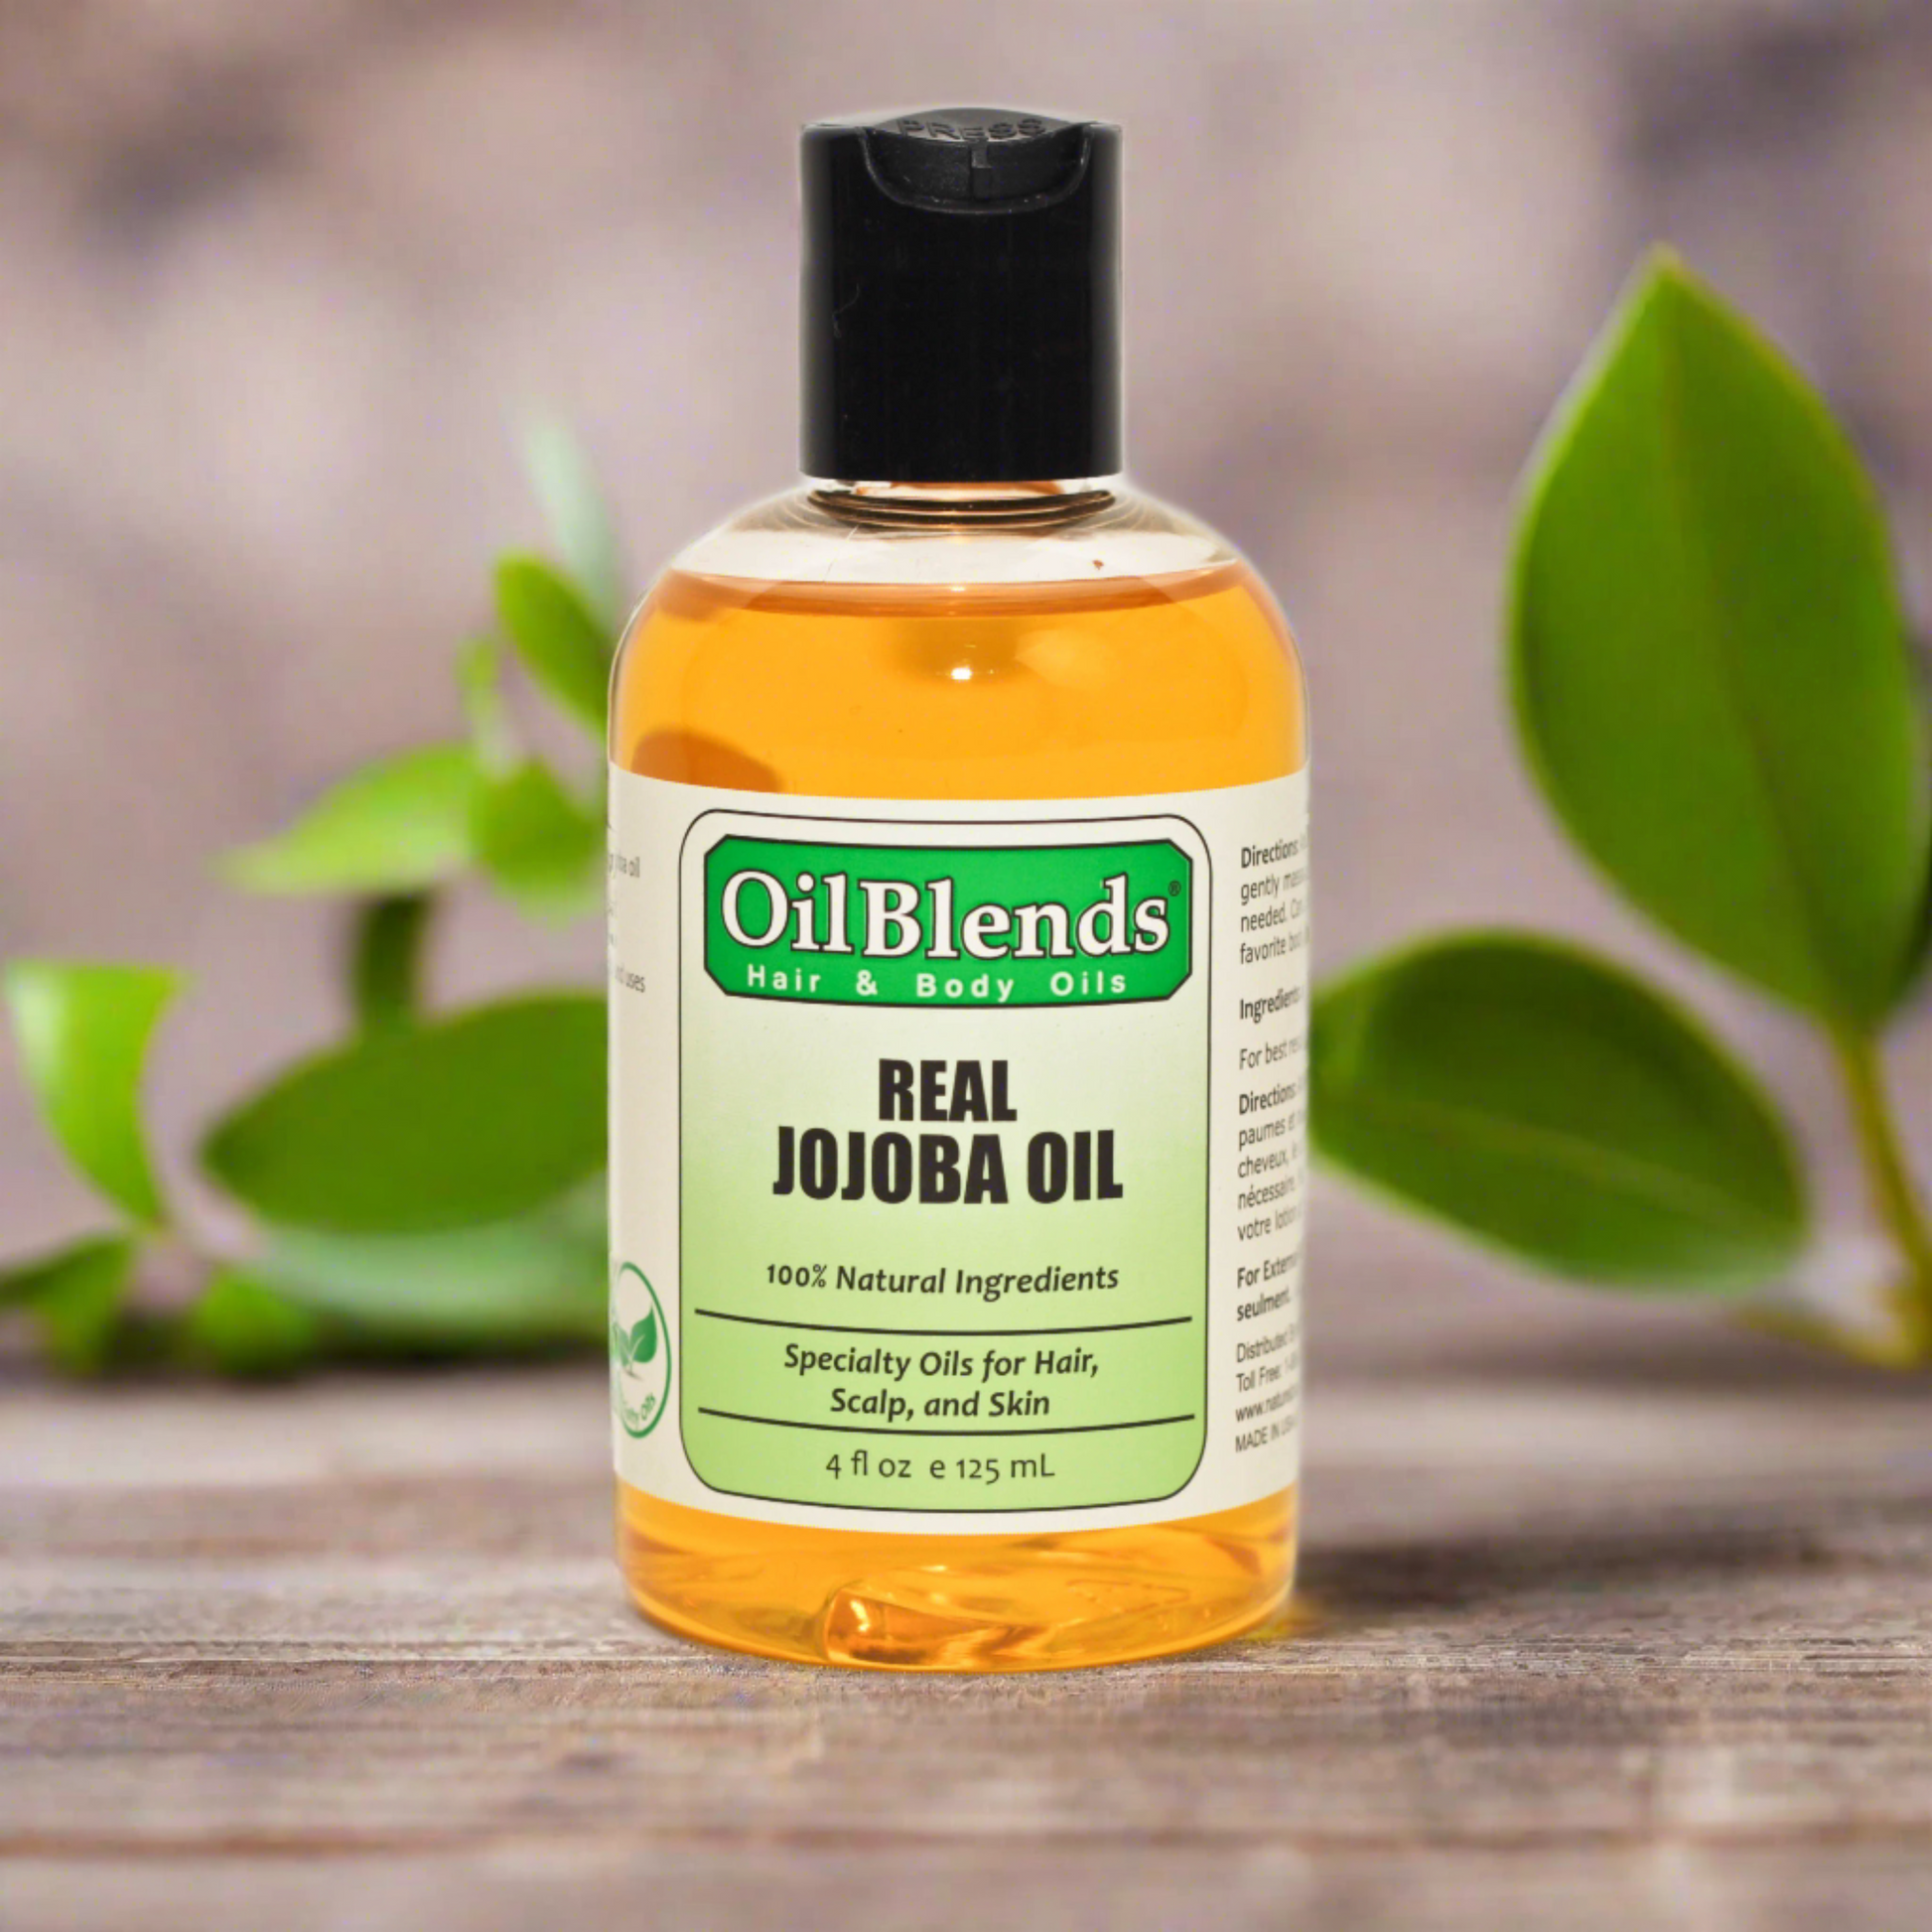 OilBlends Jojoba Oil is great for mature, aging skin and reducing signs of wrinkles. Jojoba oil is highly penetrating. Its chemical structure closely resembles the natural sebum within our skin; the skin’s own oily secretions.